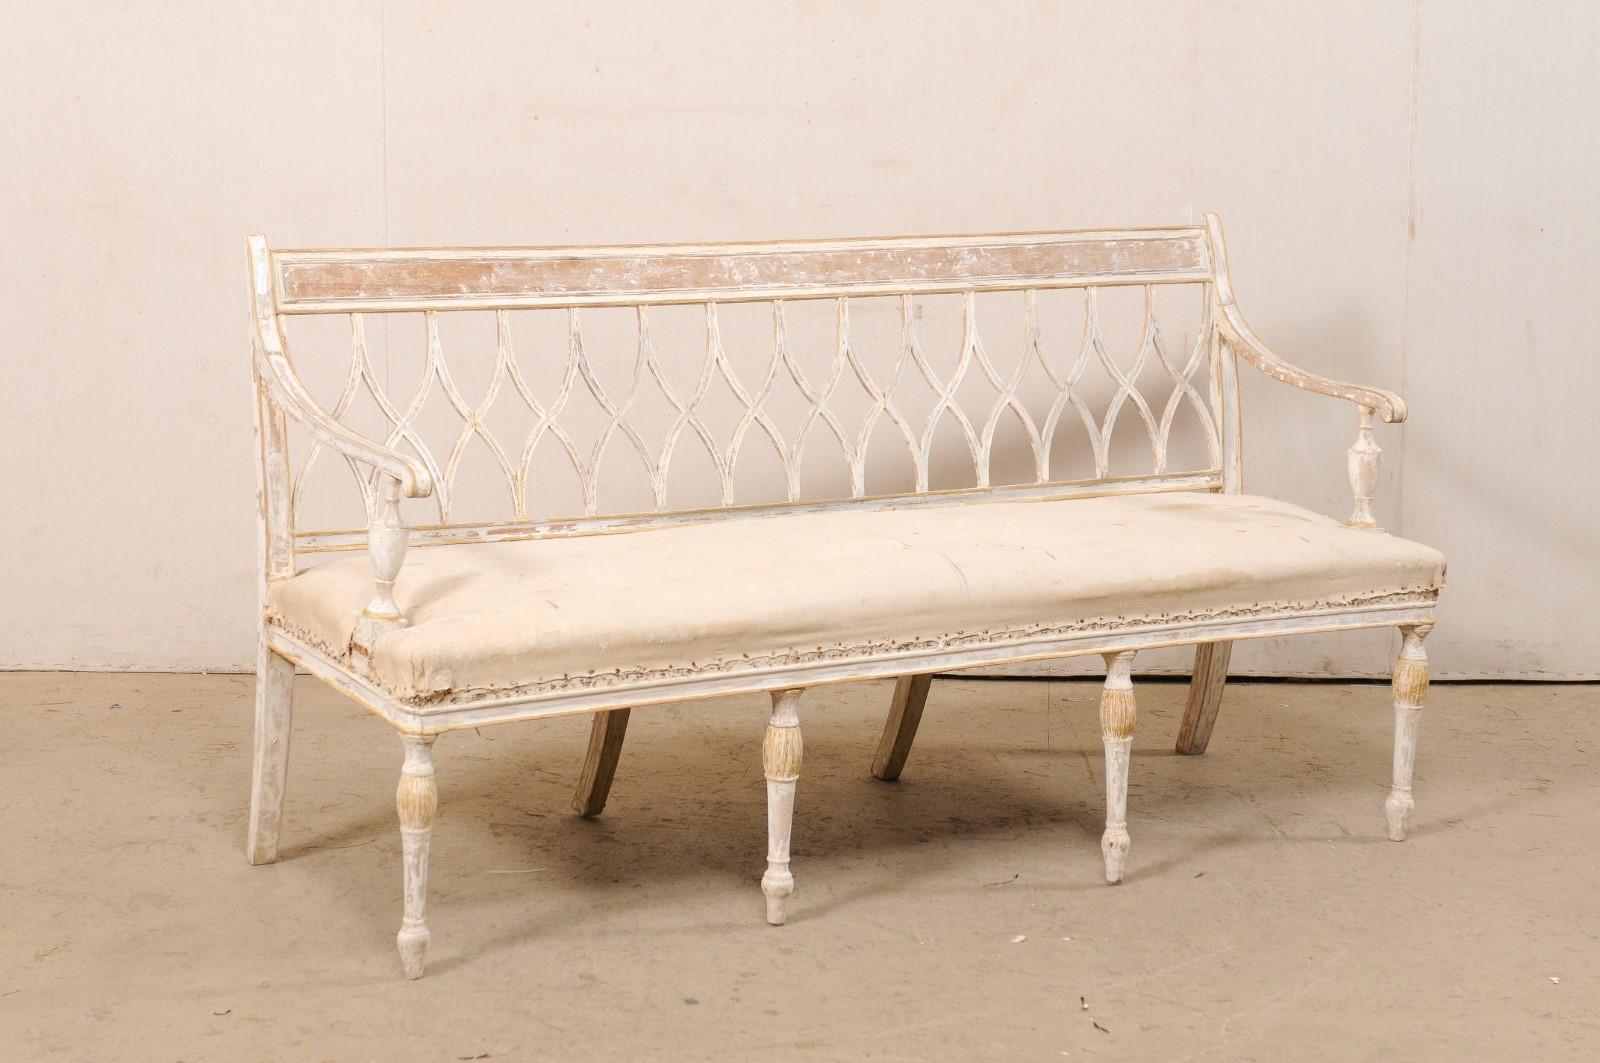 A Swedish Neoclassical style carved-wood sofa bench from the early 19th century. This antique settee from Sweden features a straight back rail atop a beautiful succession of open back splats in curvy x-shaped design (reminiscent of an hour-glass).